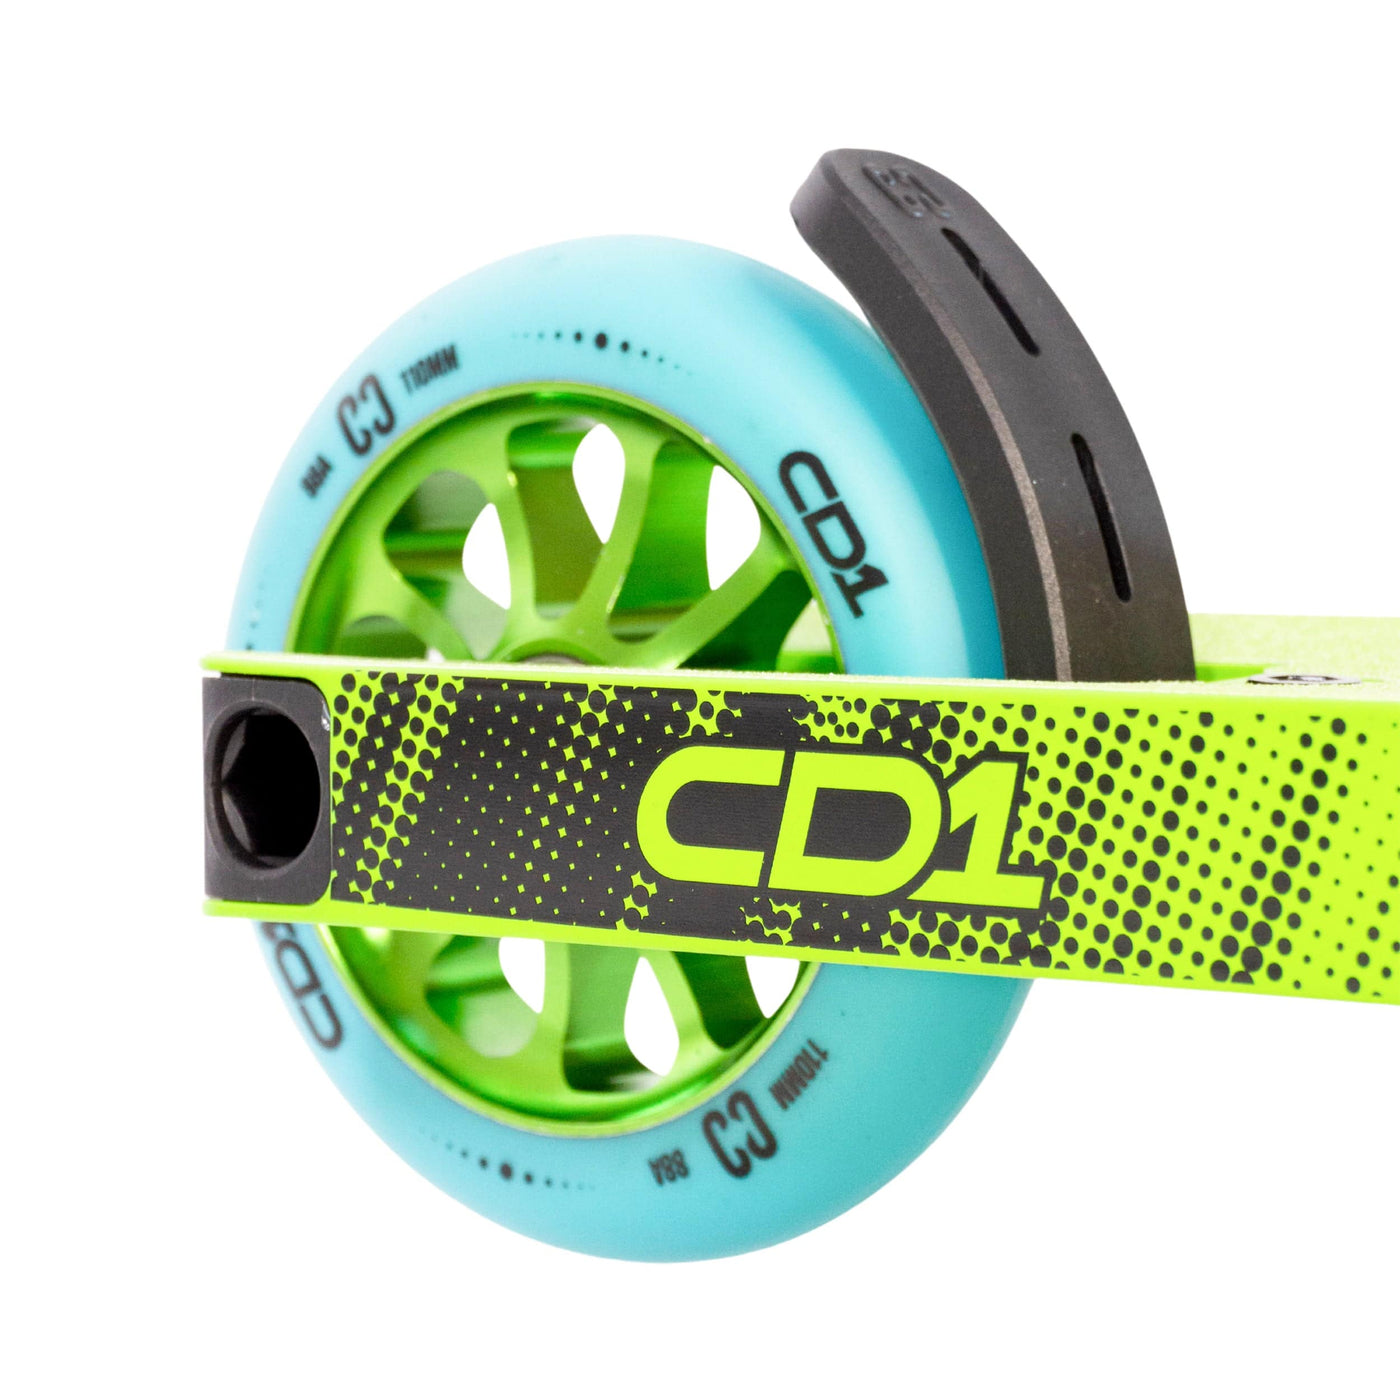 CORE CD1 Complete Stunt Scooter Lime & Teal I Adult Stunt Scooter Back Wheel